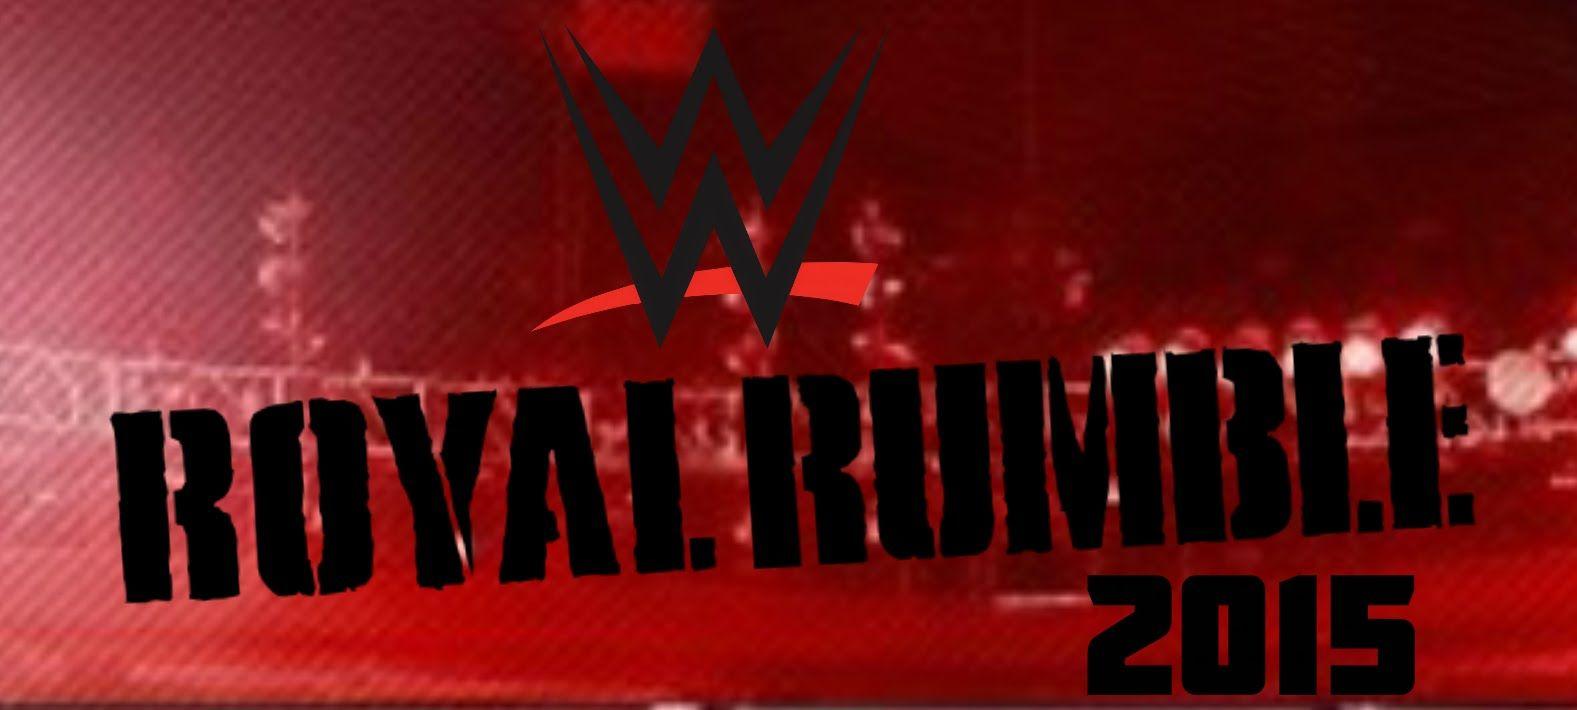 WWE Royal Rumble 2015 Red Wallpapers HD 3670 Wallpapers